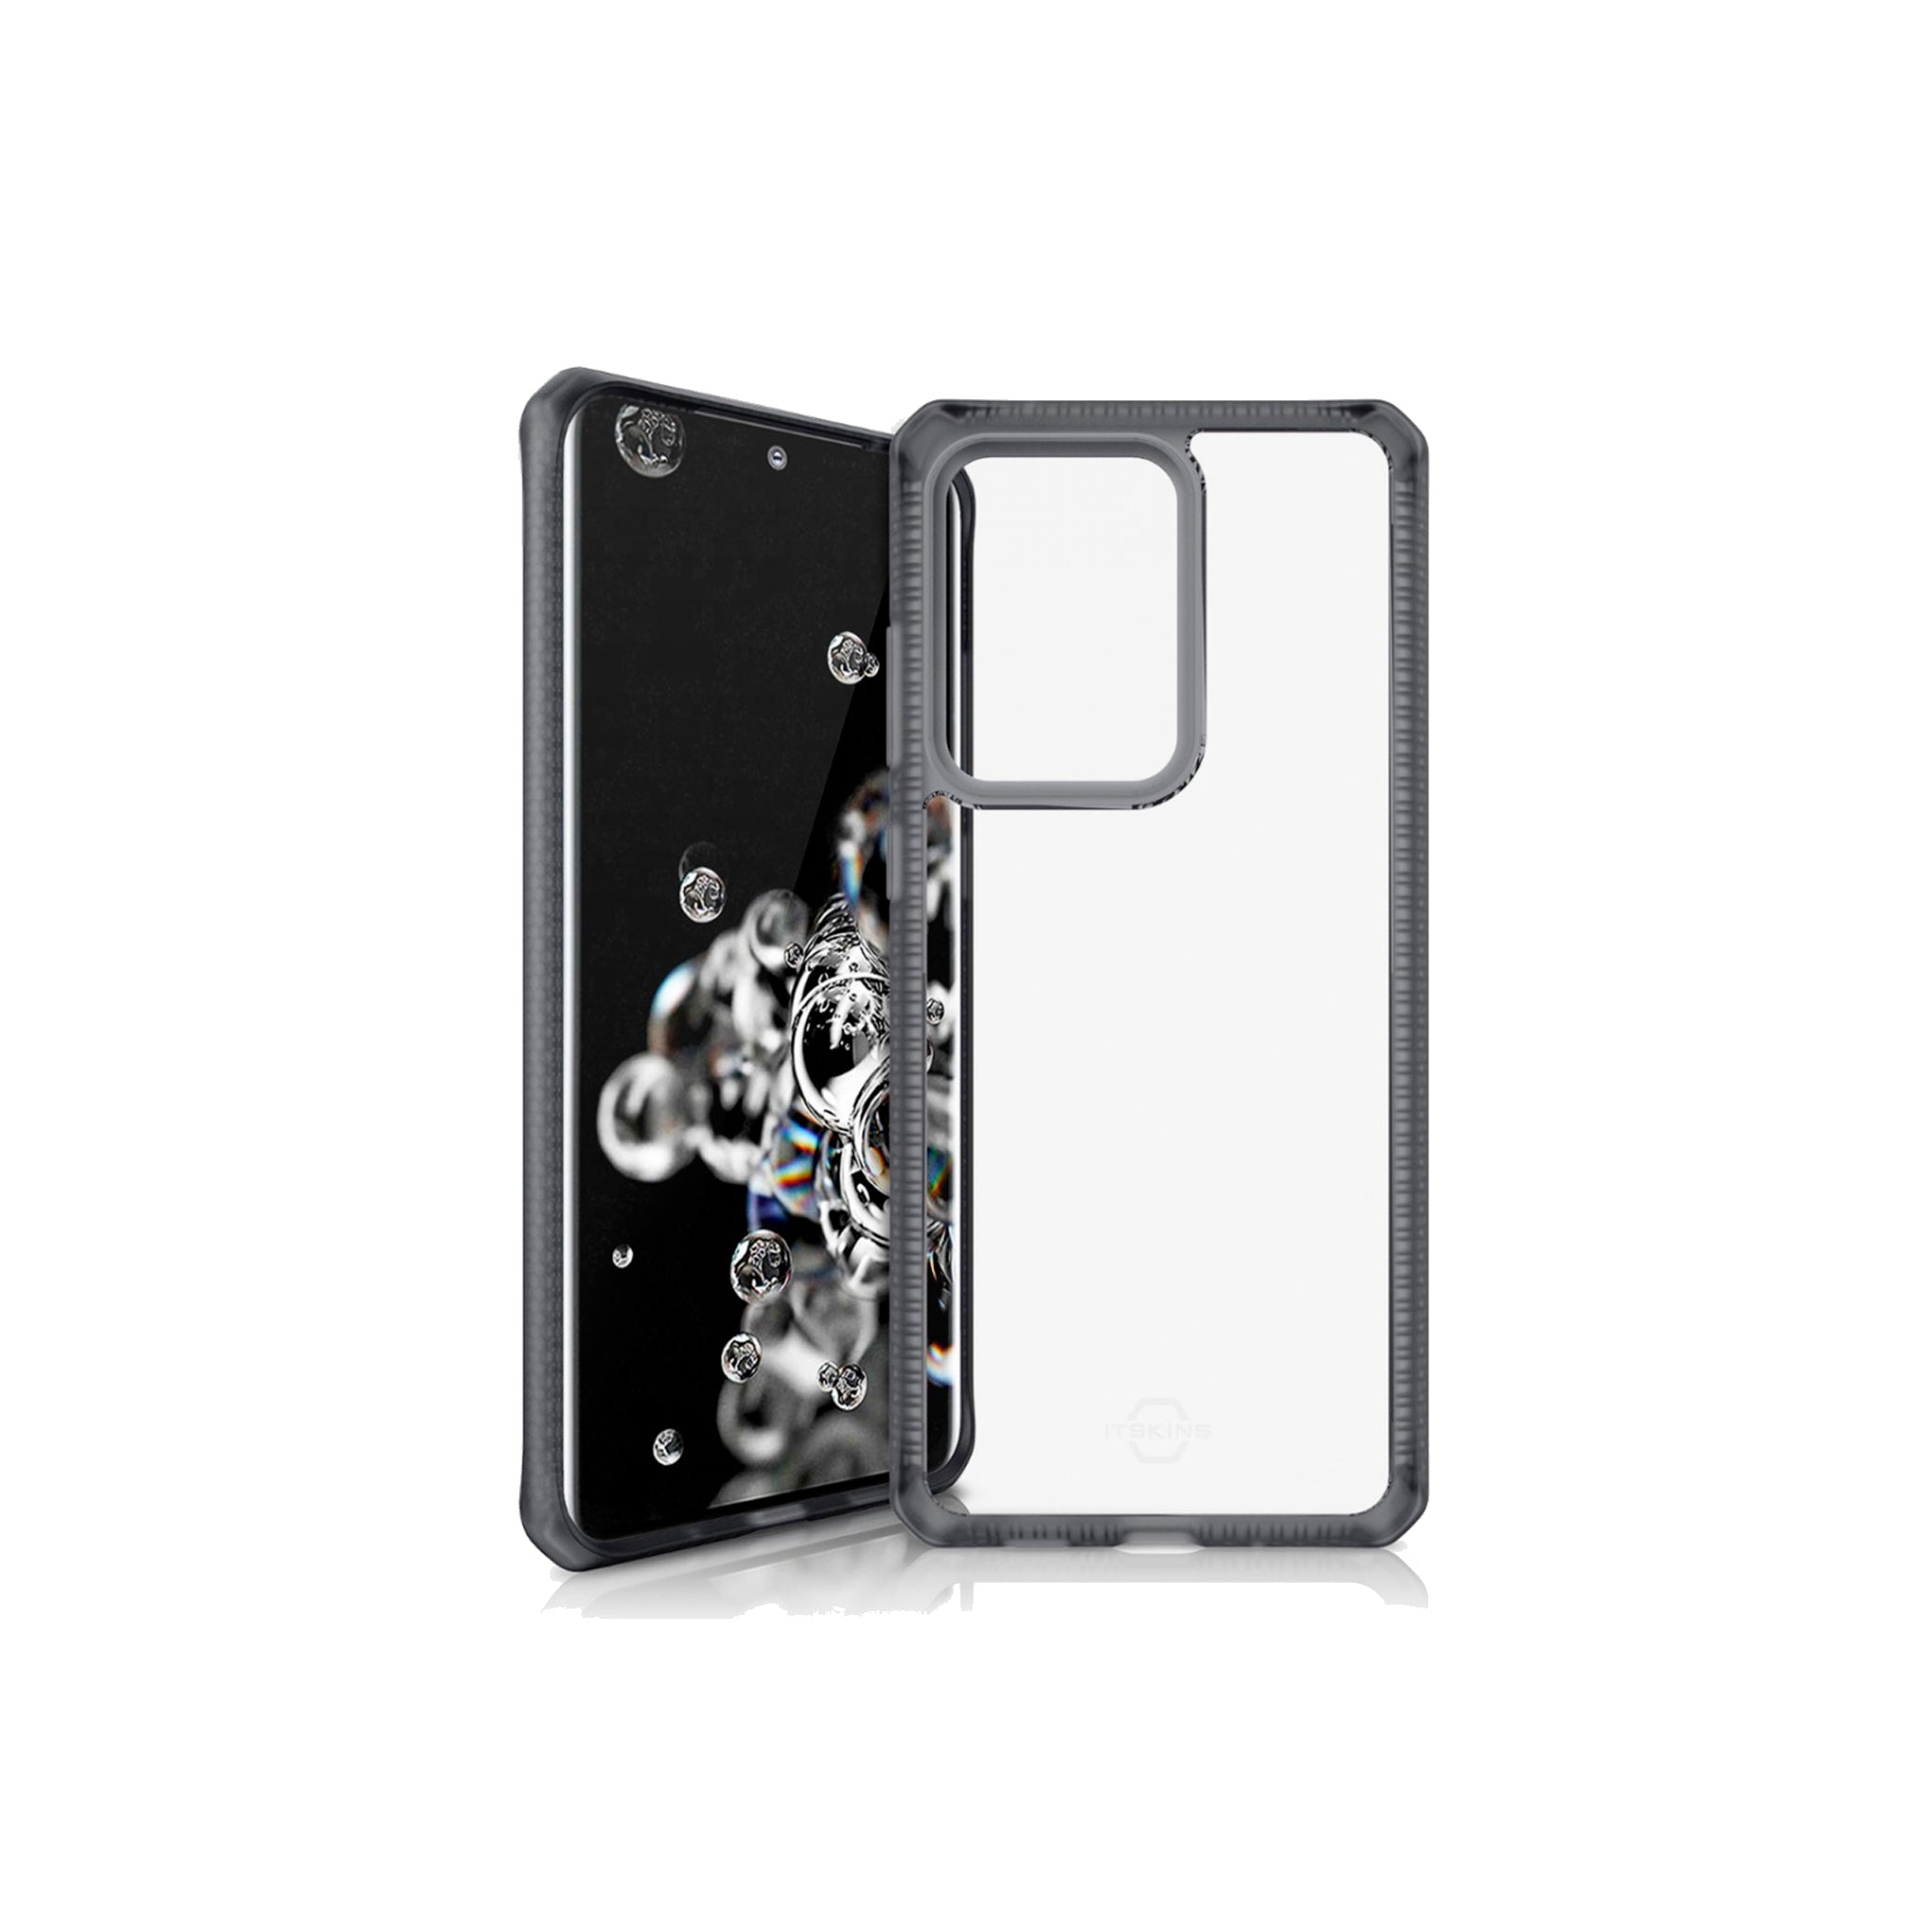 Itskins - Hybrid Frost Case For Apple Iphone 12 Pro Max - Smoke And Transparent